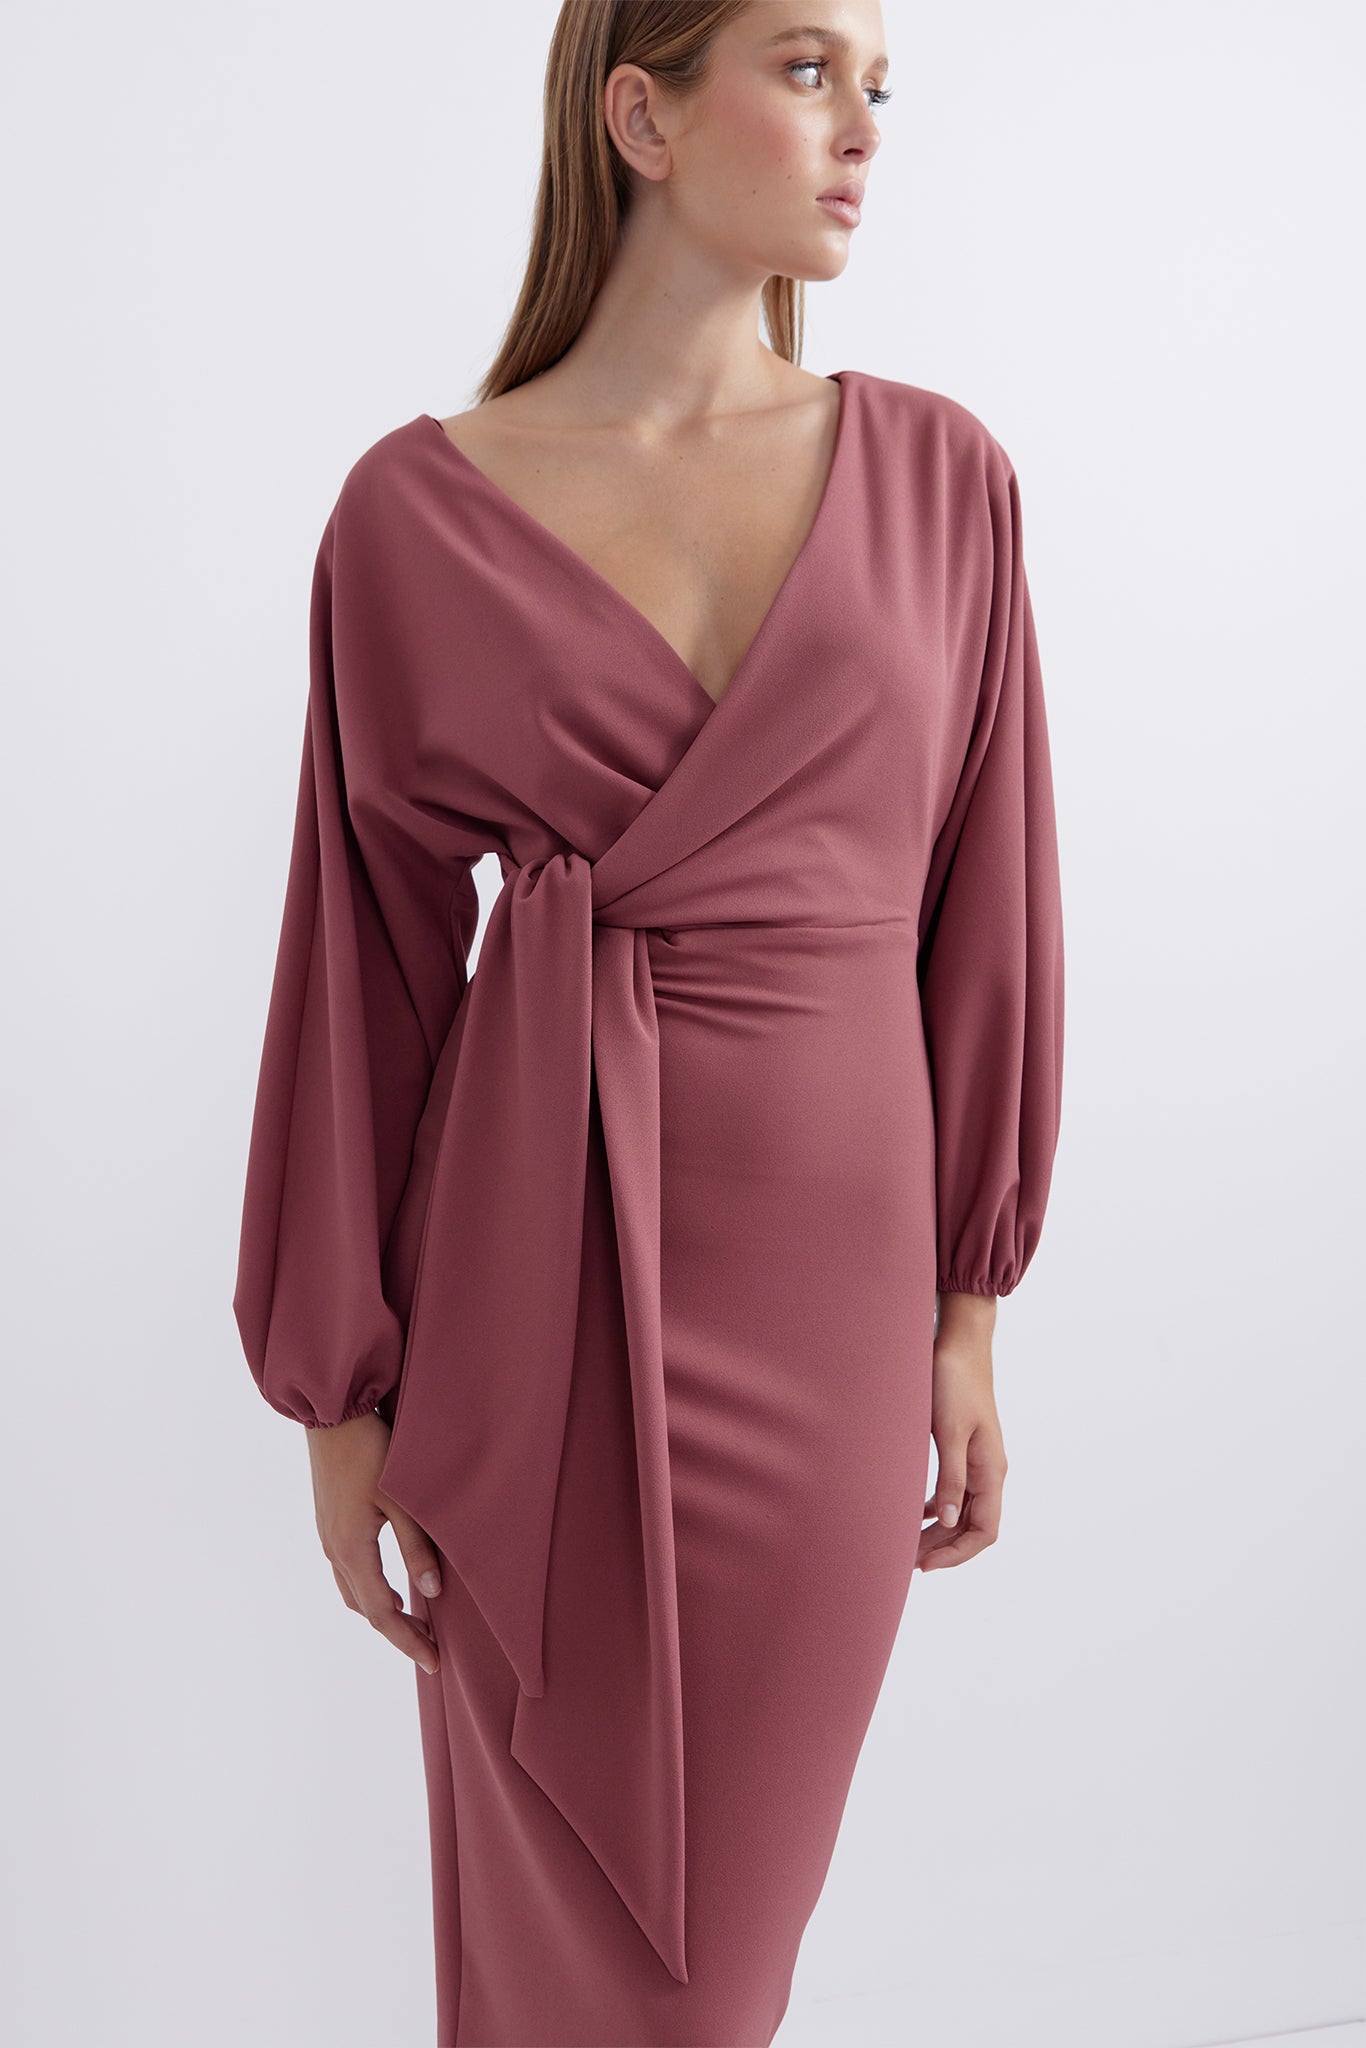 Charmer Midi - TAKE 40% OFF DISCOUNT APPLIED AT CHECKOUT